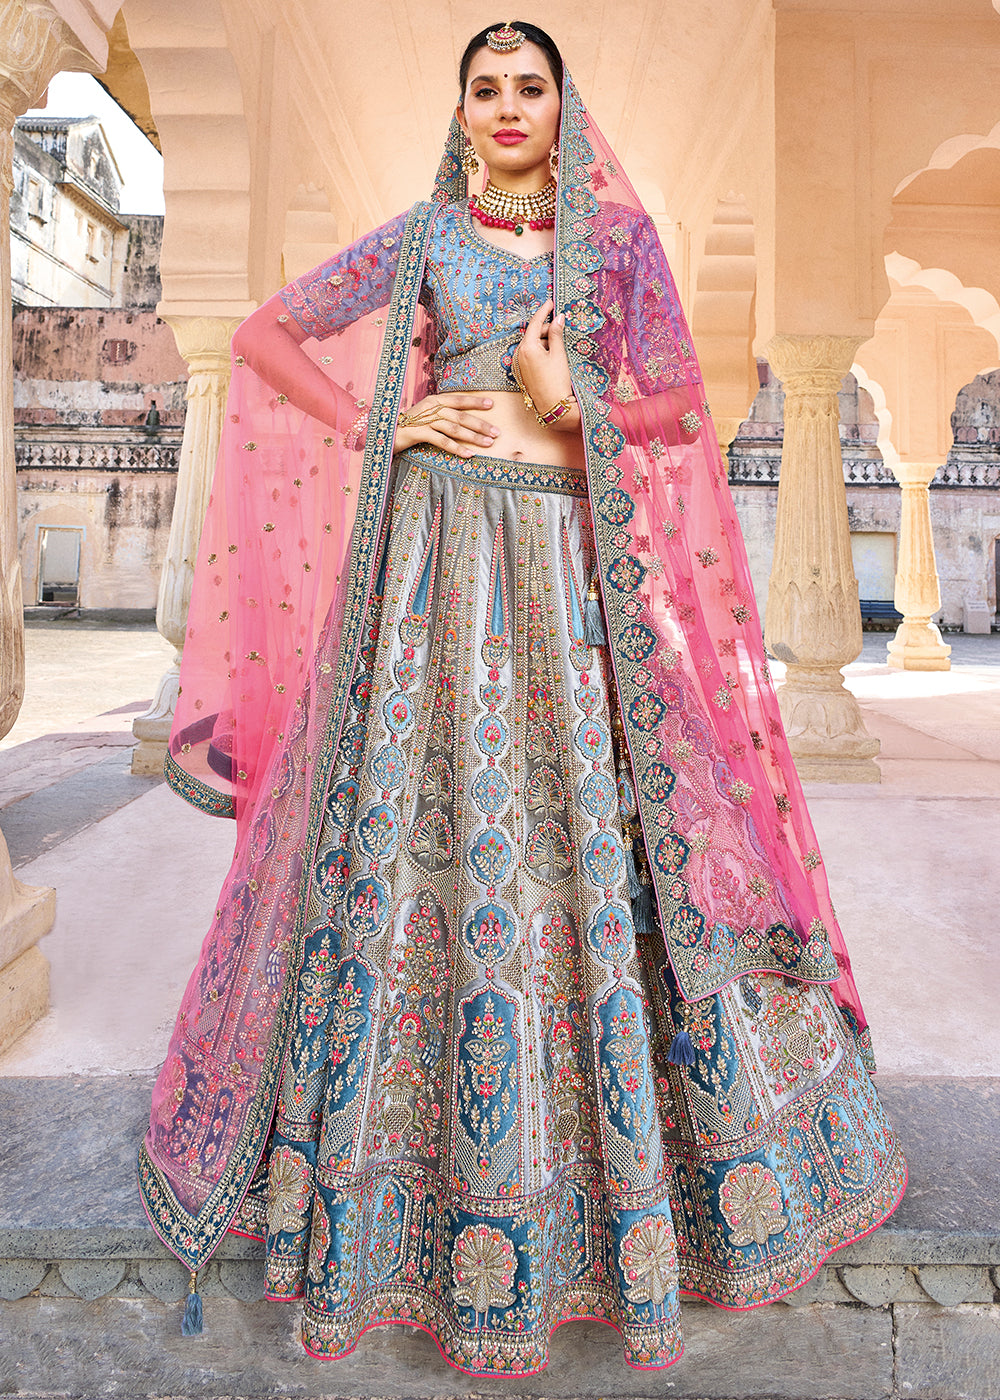 Indian Modern Bridal Outfit: Red shaded Sequin Lehenga Choli – B Anu Designs